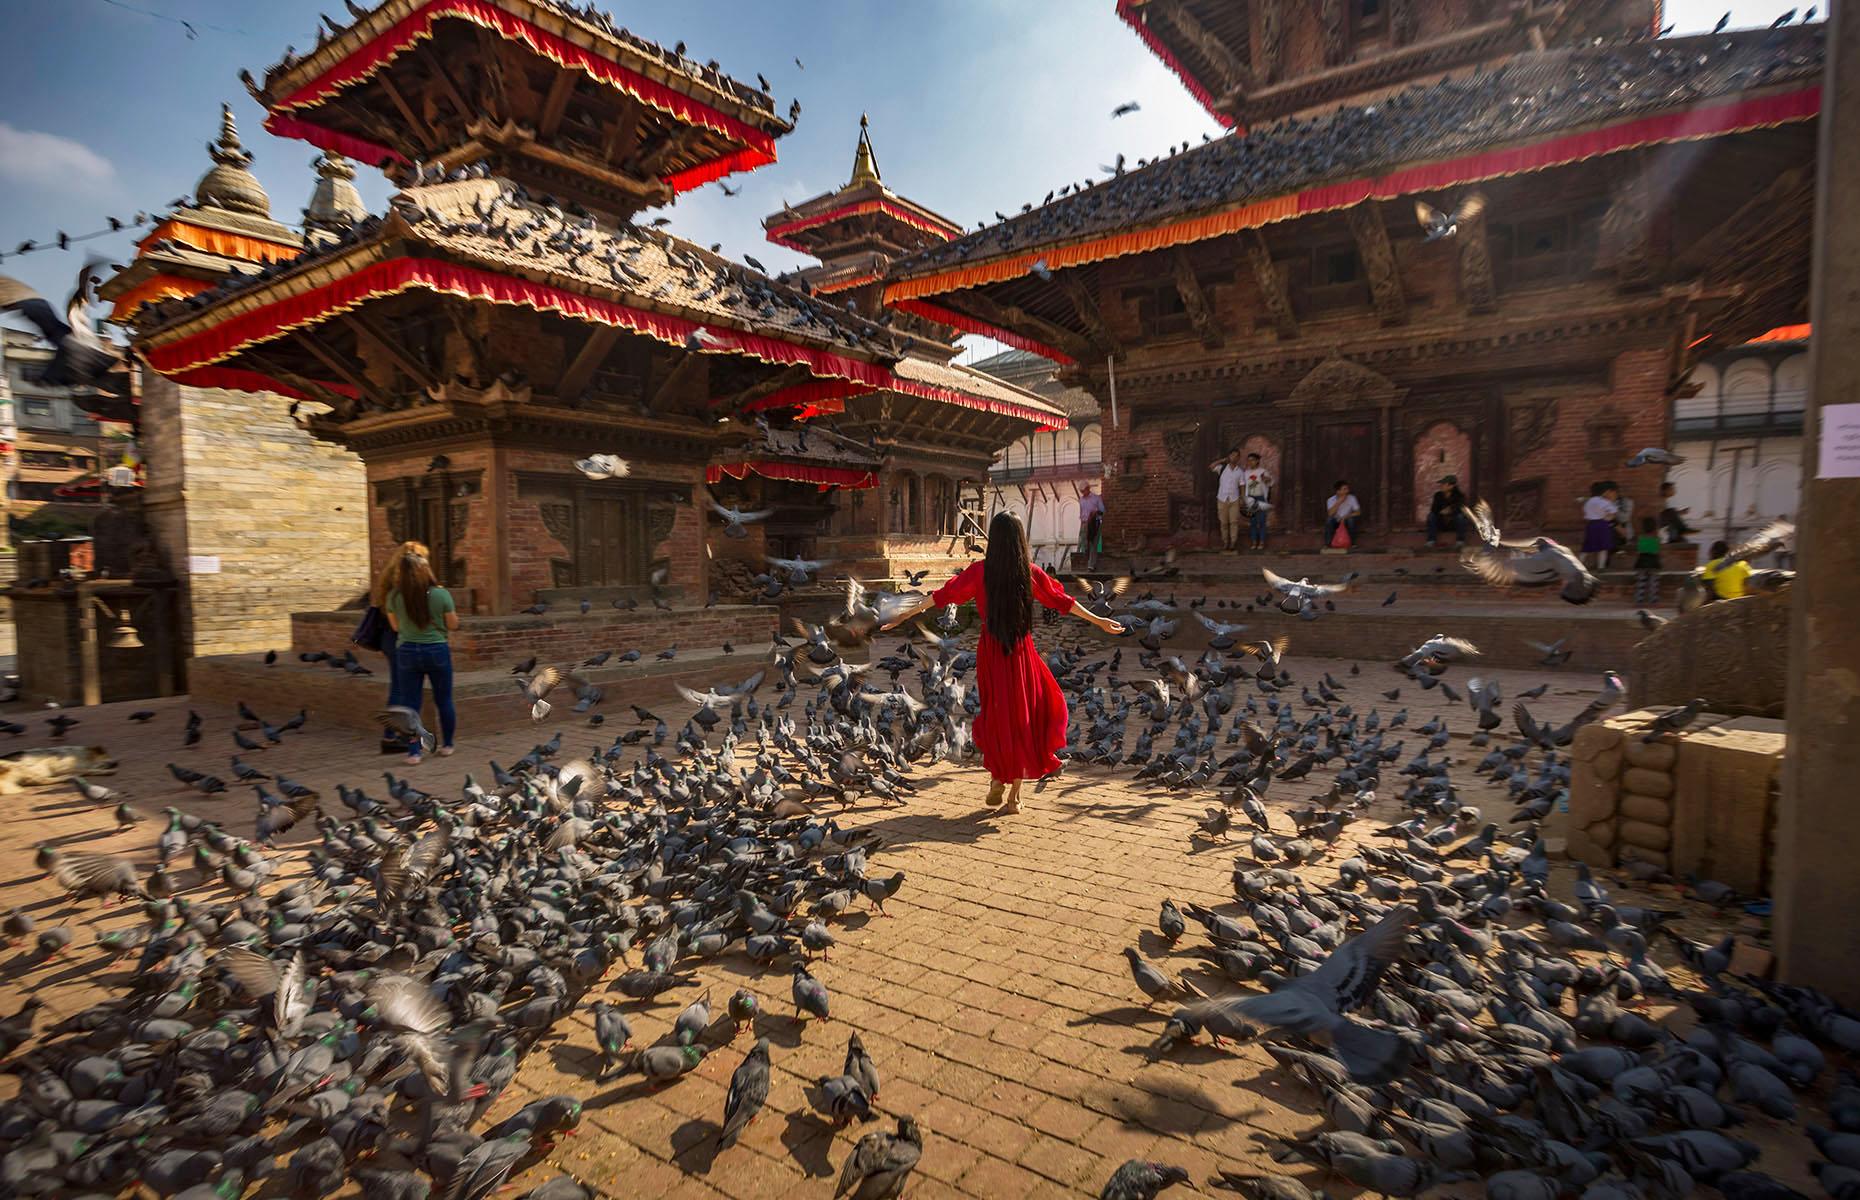 <p>When Bob Seger famously sang about getting away to the Nepalese capital in his song <em>Katmandu,</em> it was more about a state of mind rather than a particular place. He was sick of touring constantly and in the Seventies, Kathmandu was seen as distant and authentic; a place to get away from it all and find yourself. In many ways, it still is. Wandering through the city’s ancient pagodas and stupas is like stepping back in time. </p>